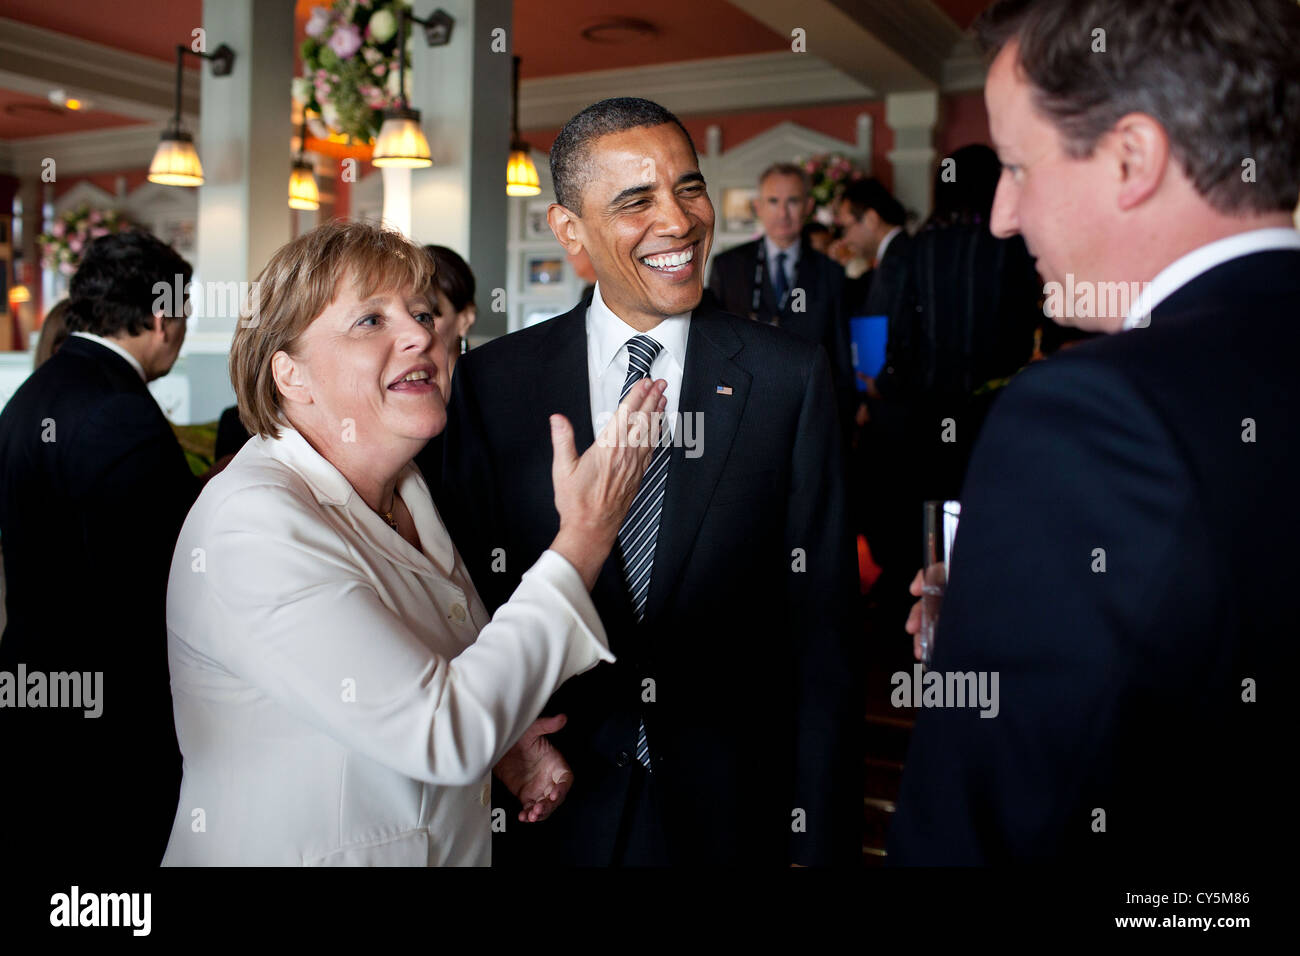 US President Barack Obama talks with German Chancellor Angela Merkel and British Prime Minister David Cameron before the start of the working G8 dinner May 26, 2011 in Deauville, France. Stock Photo